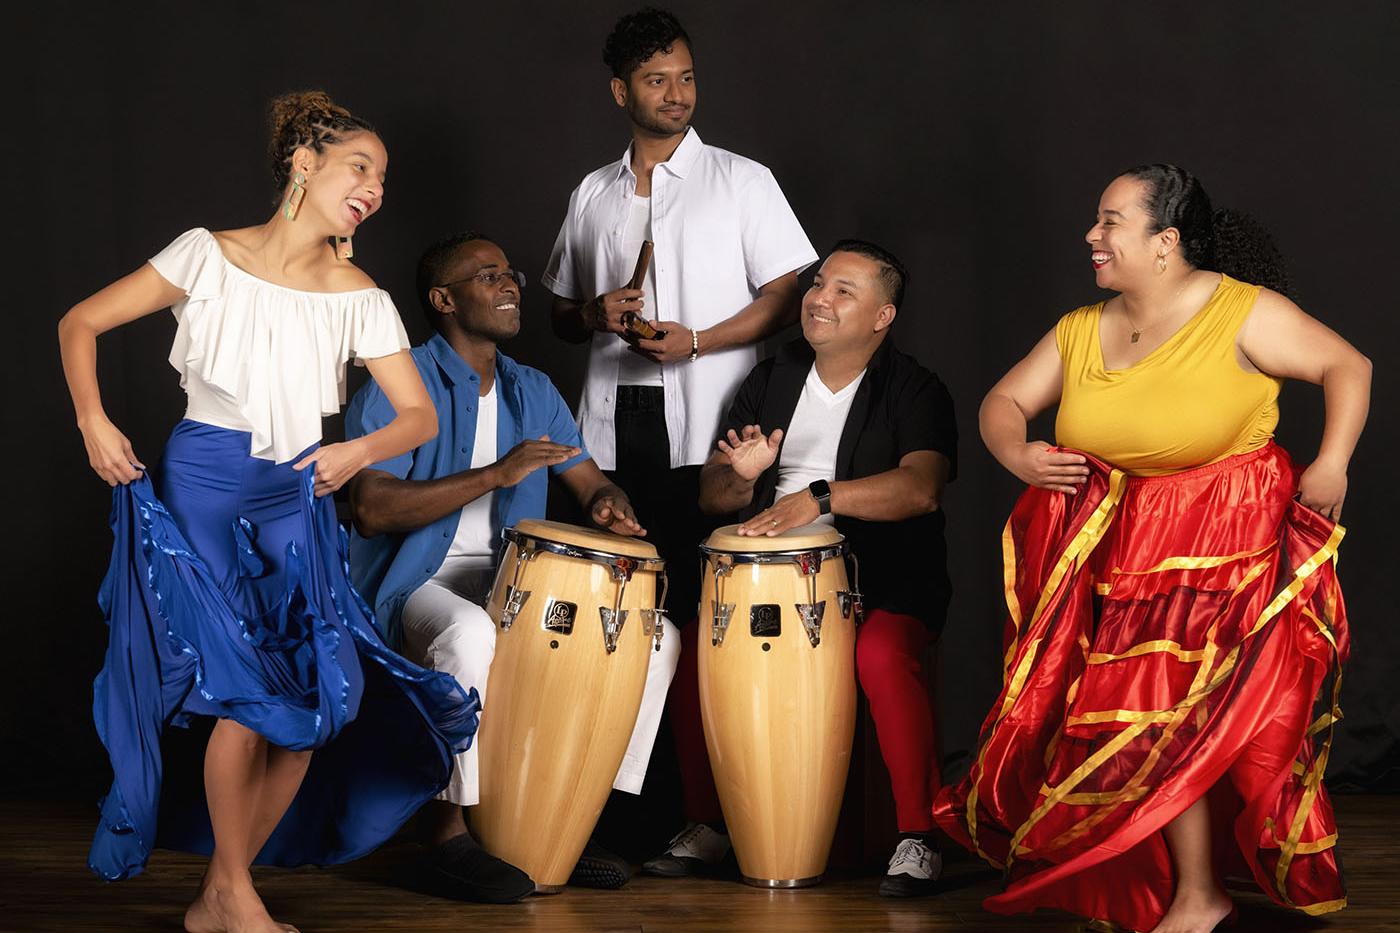 Mambo Dinamico, a Durham-based professional dance troop